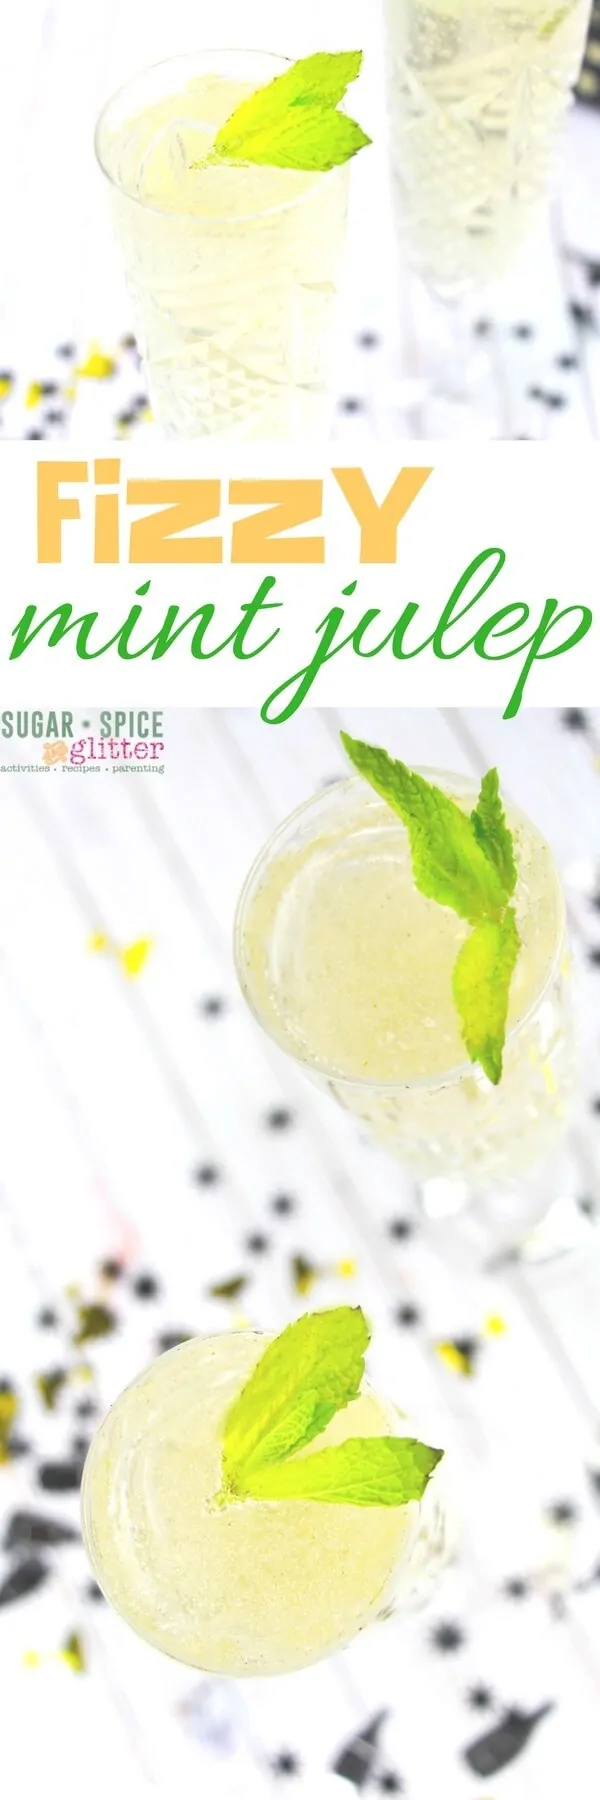 This Fizzy Mint Julep cocktail is a fun, celebratory drink that is smoother than a traditional mint julep but still has all of the flavor. If you're looking for a twist on a champagne cocktail, give this a try.